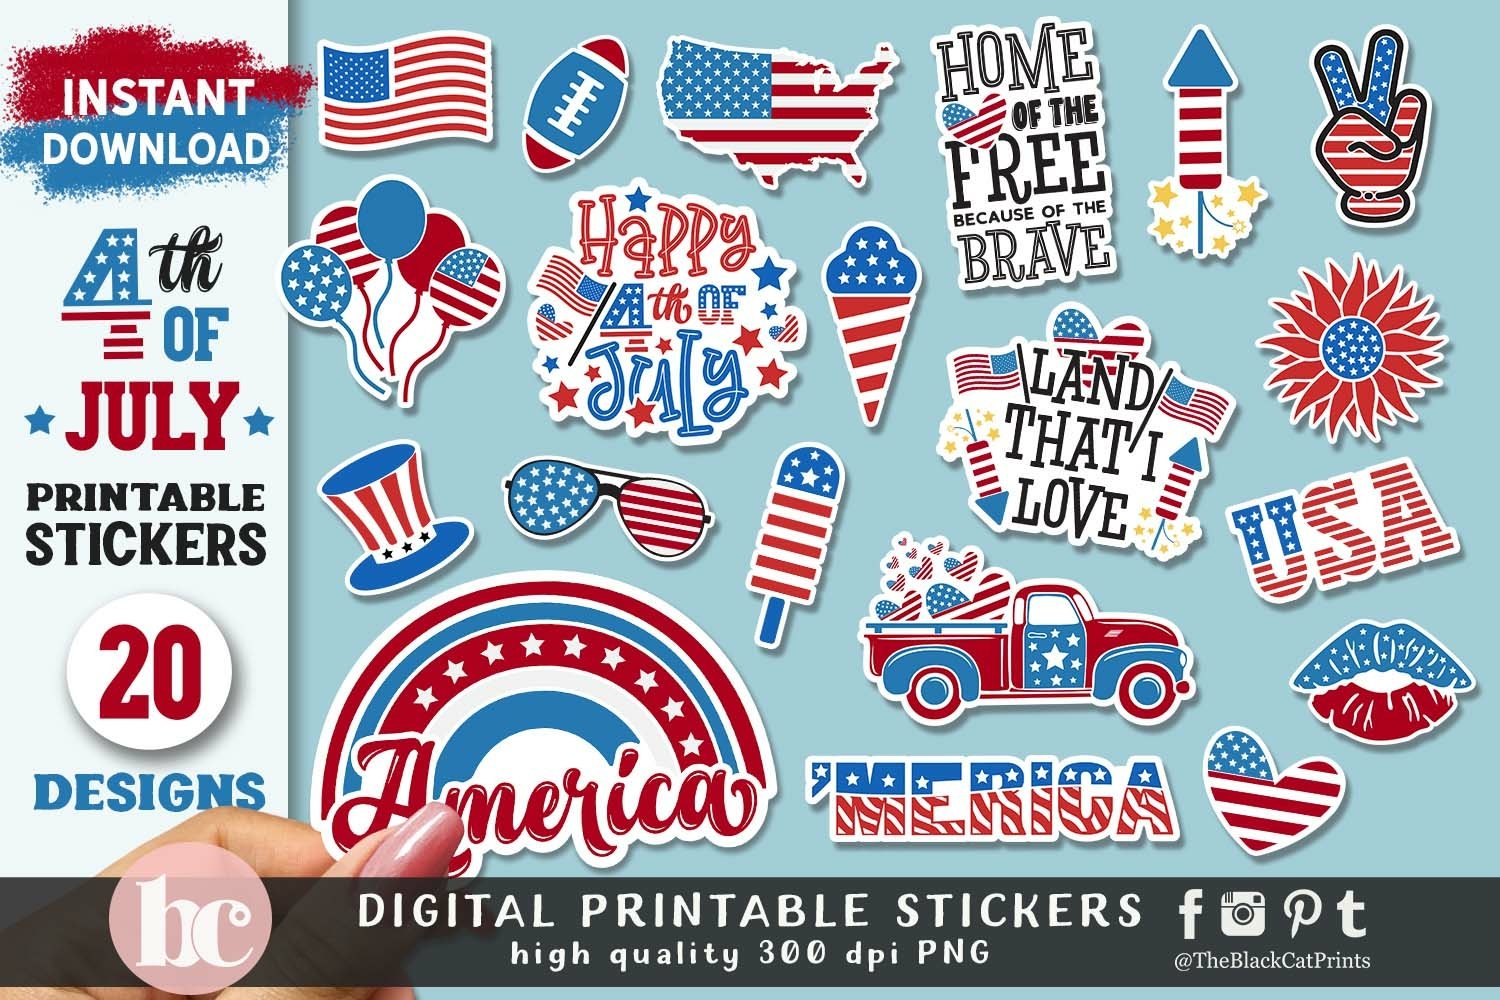 Cover image of 4th Of July Stickers Pack.